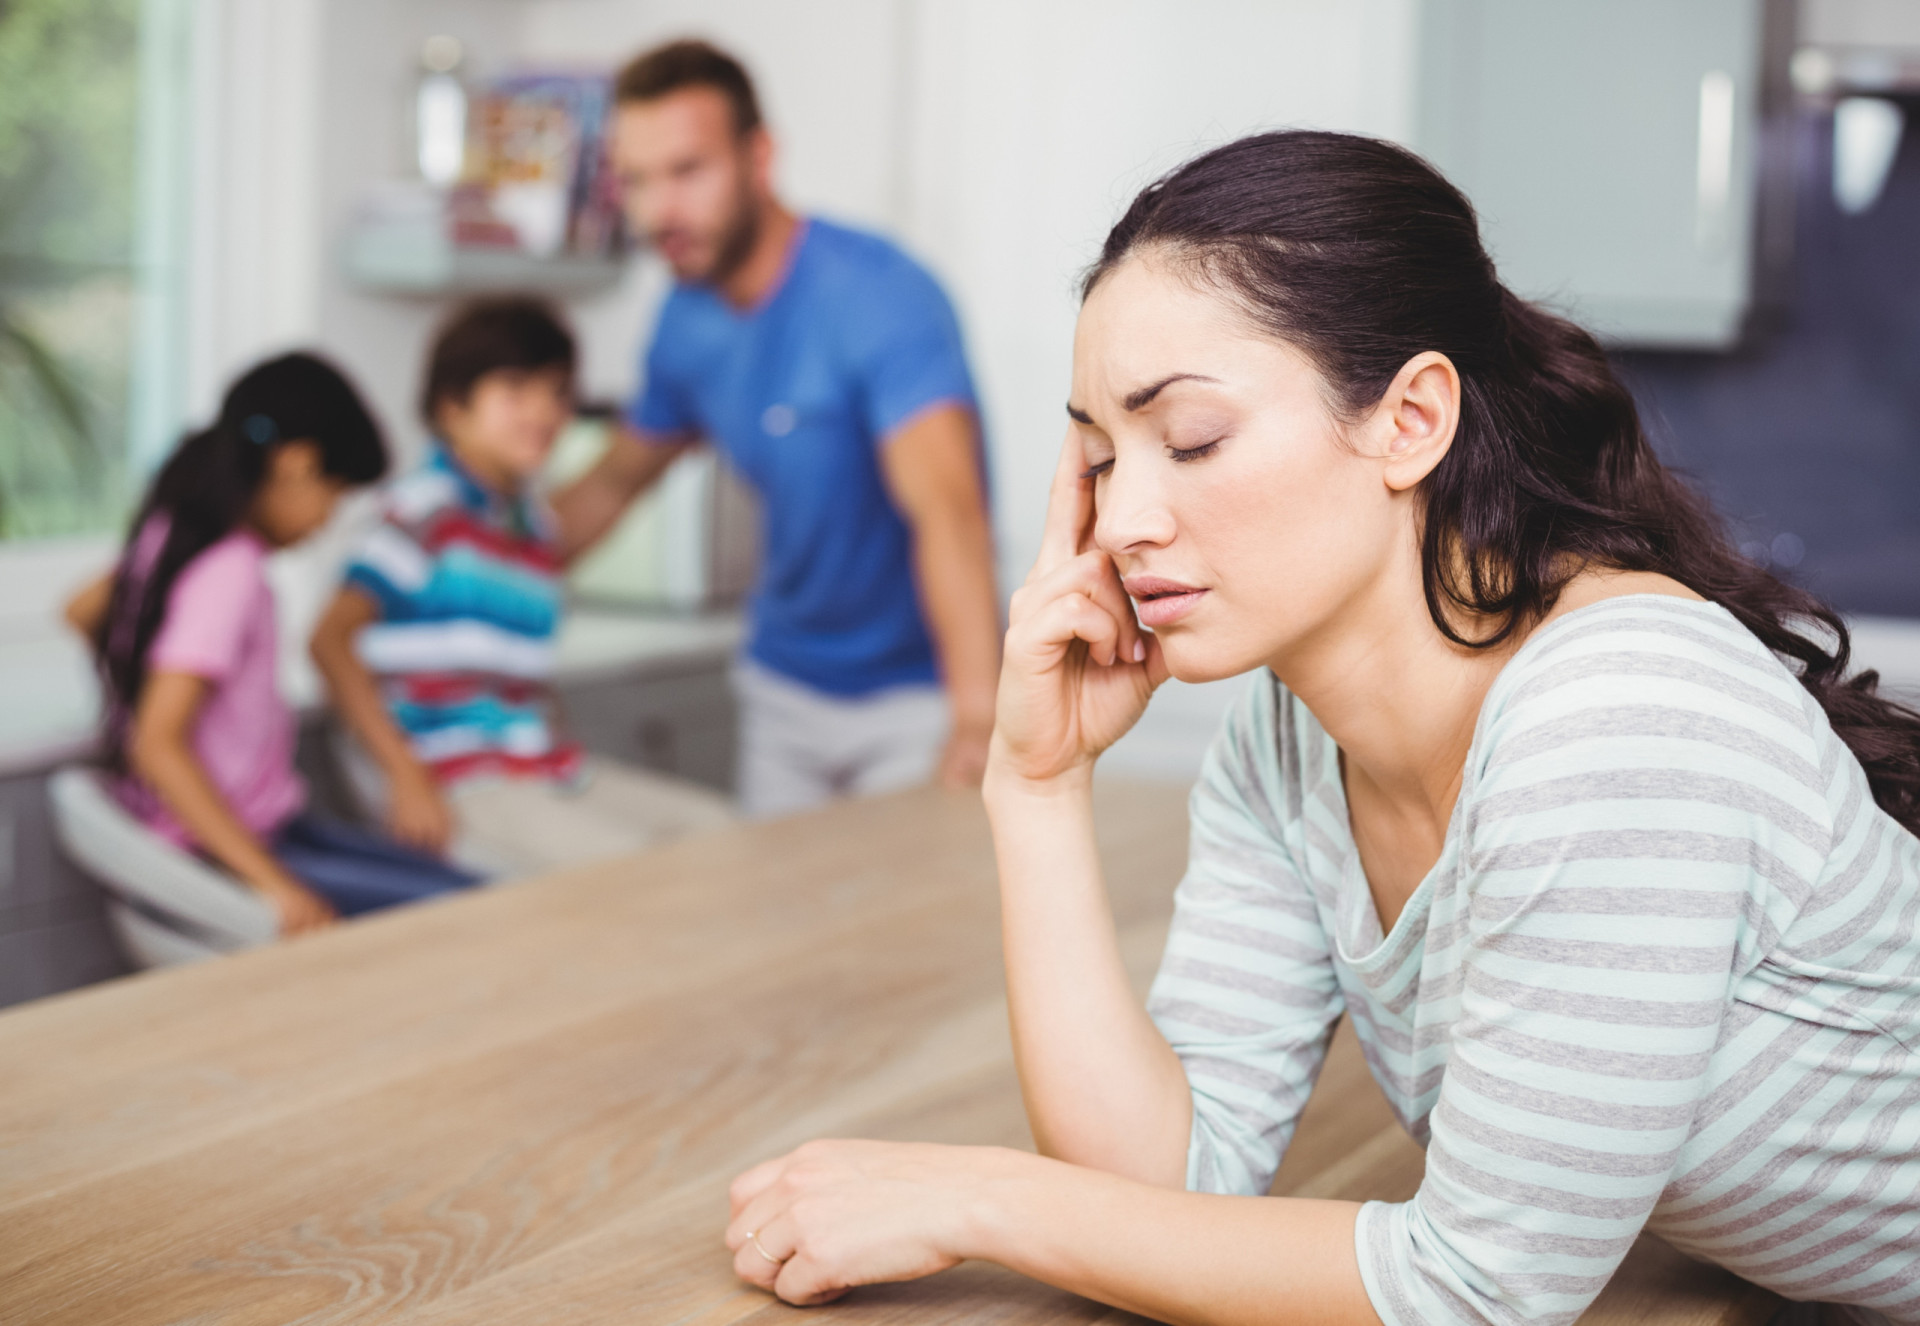 <p>In extreme cases, a mom guilt complex can lead to a desire to end one's life. For anyone feeling this way, seeking professional help is critical.</p><p>You may also like:<a href="https://www.starsinsider.com/n/461434?utm_source=msn.com&utm_medium=display&utm_campaign=referral_description&utm_content=548172en-en"> Absurdly short reigns in royal history</a></p>